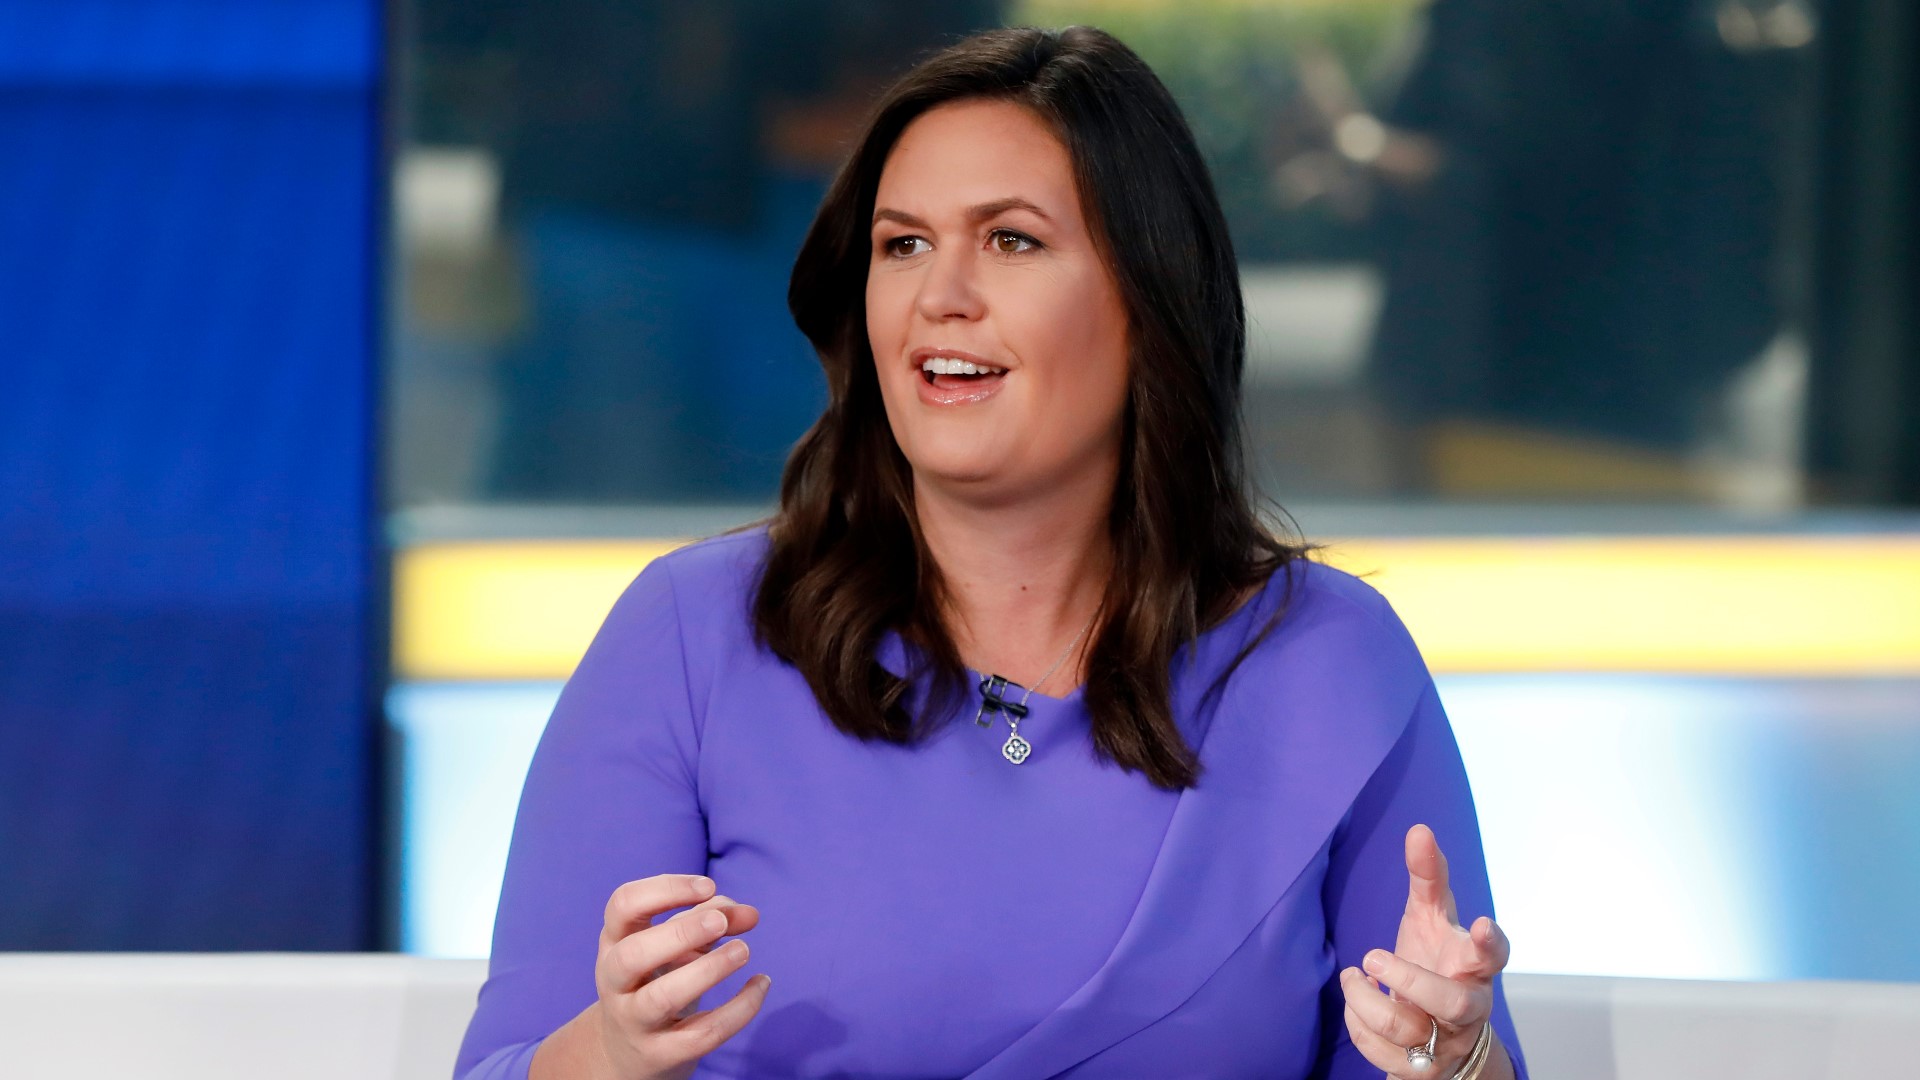 The campaign for Sarah Huckabee Sanders says she is now cancer-free after a successful surgery on Friday, Sept. 16.